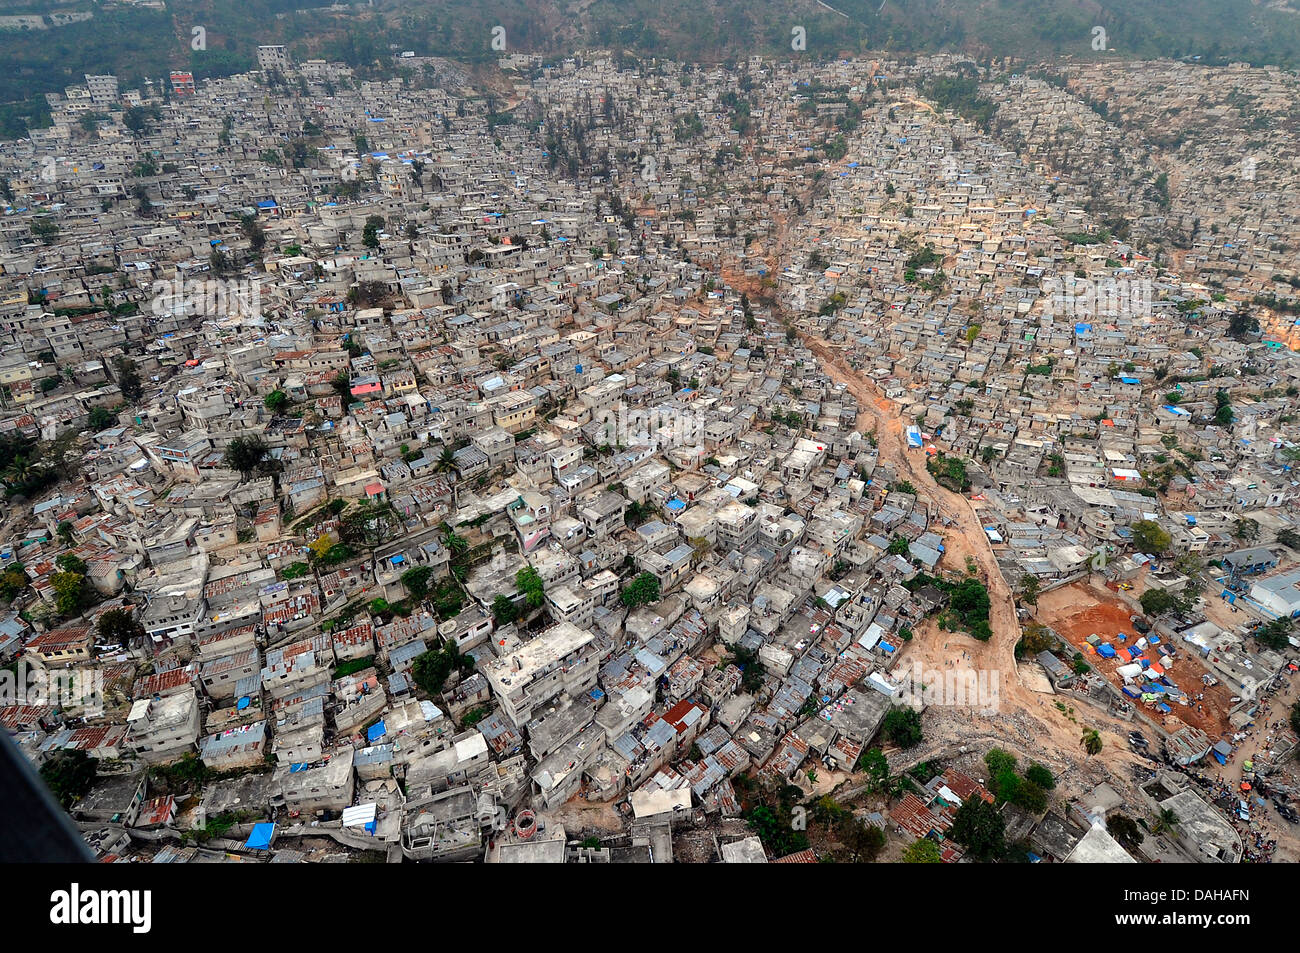 Aerial view of damaged buildings in the aftermath of a 7.0 magnitude earthquake that killed 220,000 people March 16, 2010 in Port-au-Prince, Haiti. Stock Photo